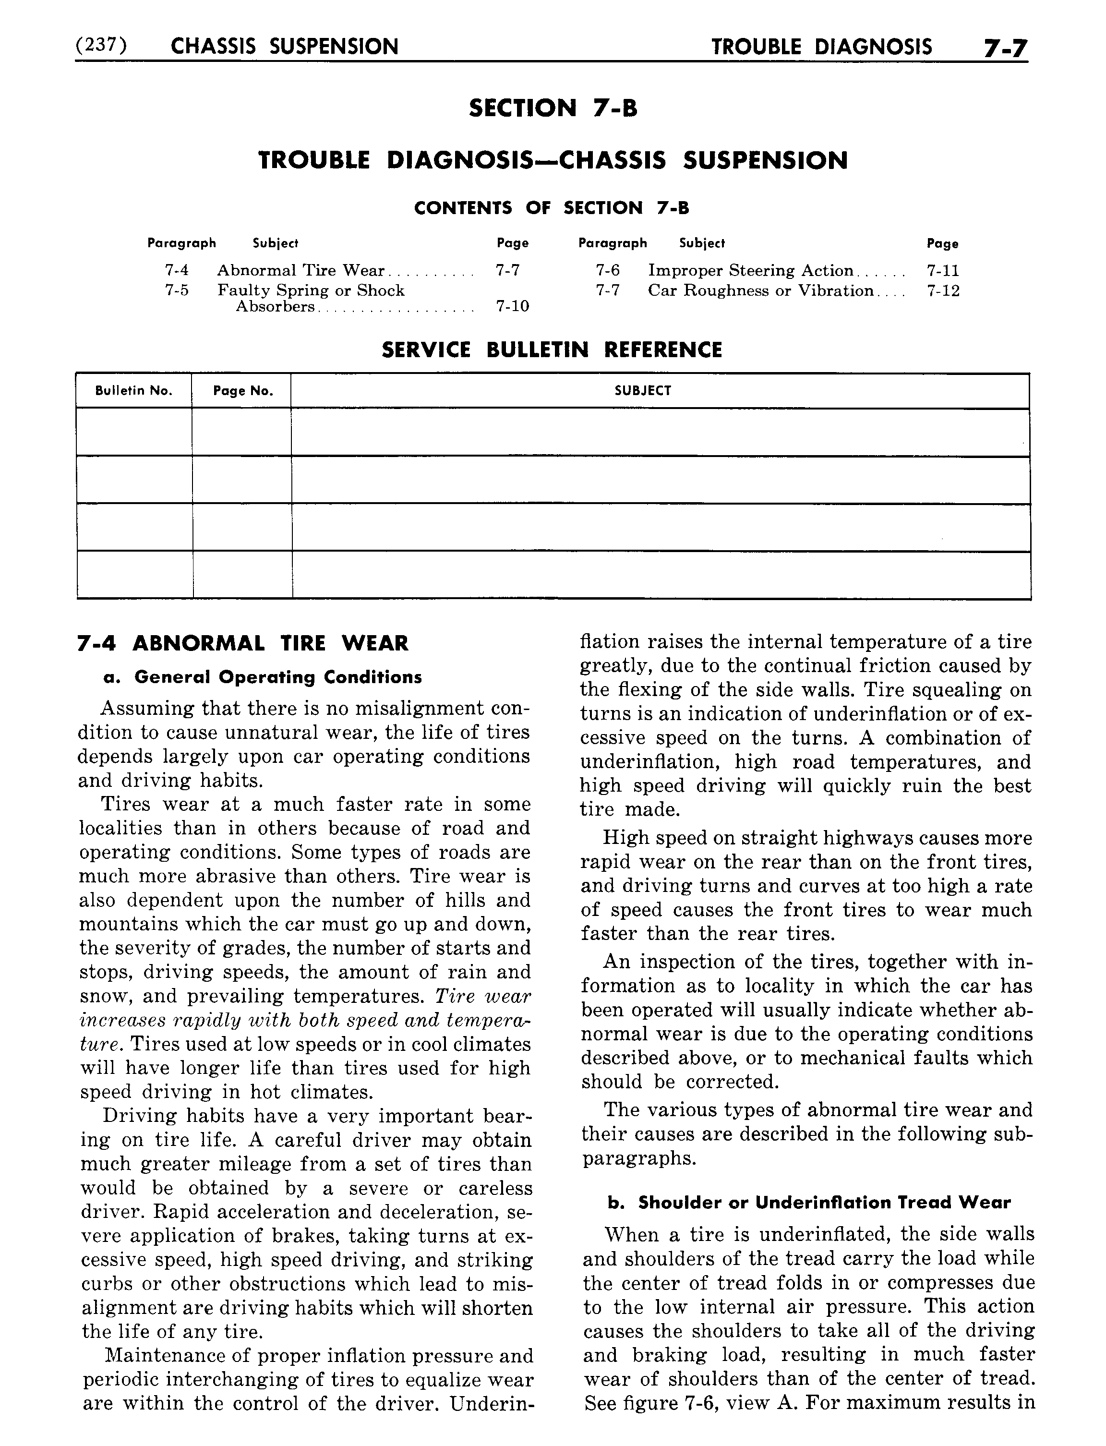 n_08 1954 Buick Shop Manual - Chassis Suspension-007-007.jpg